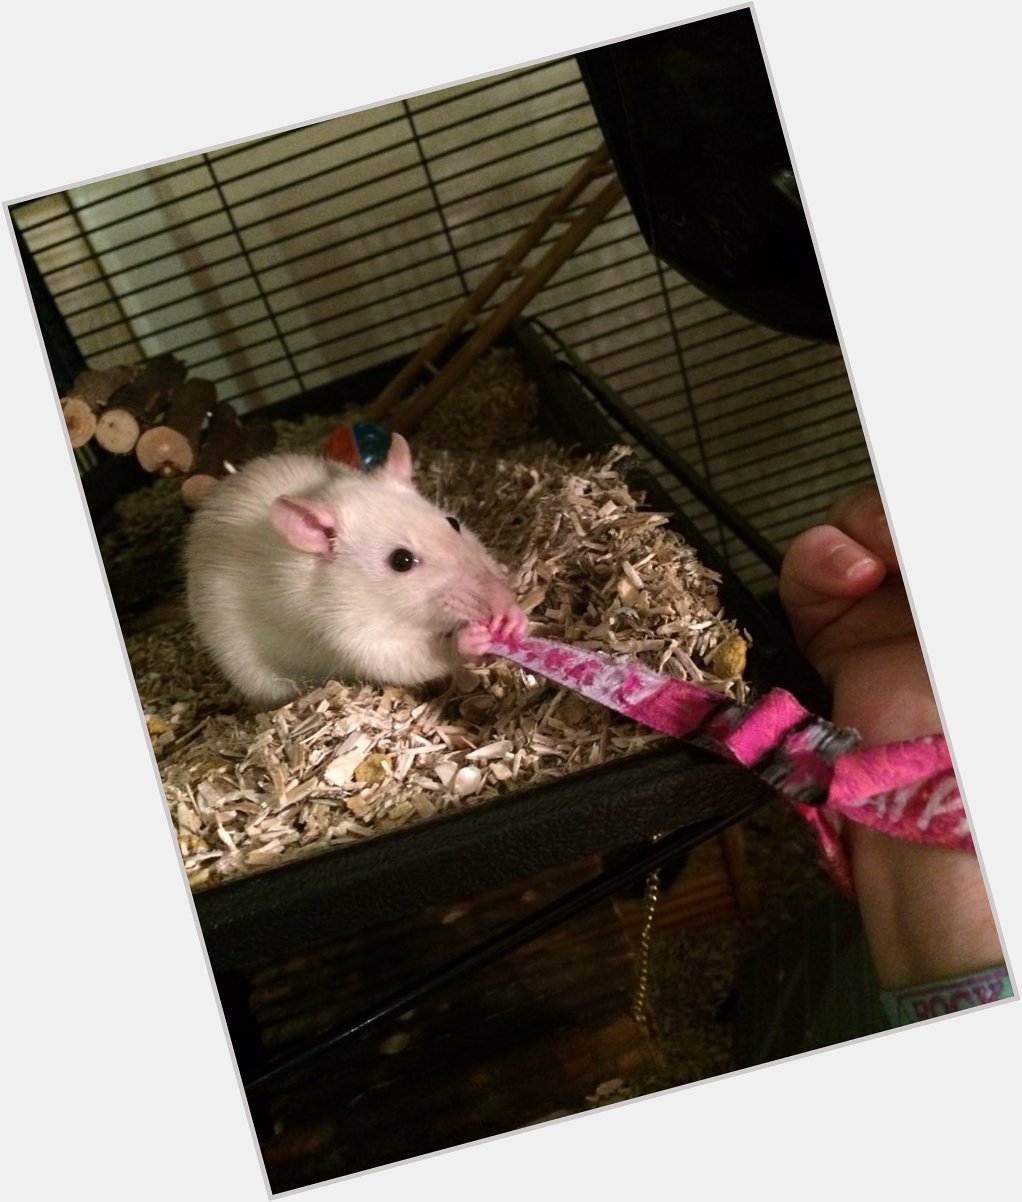  Happy Birthday from me and my pet rat Dominic ! Big fan too, wants my wristband from 